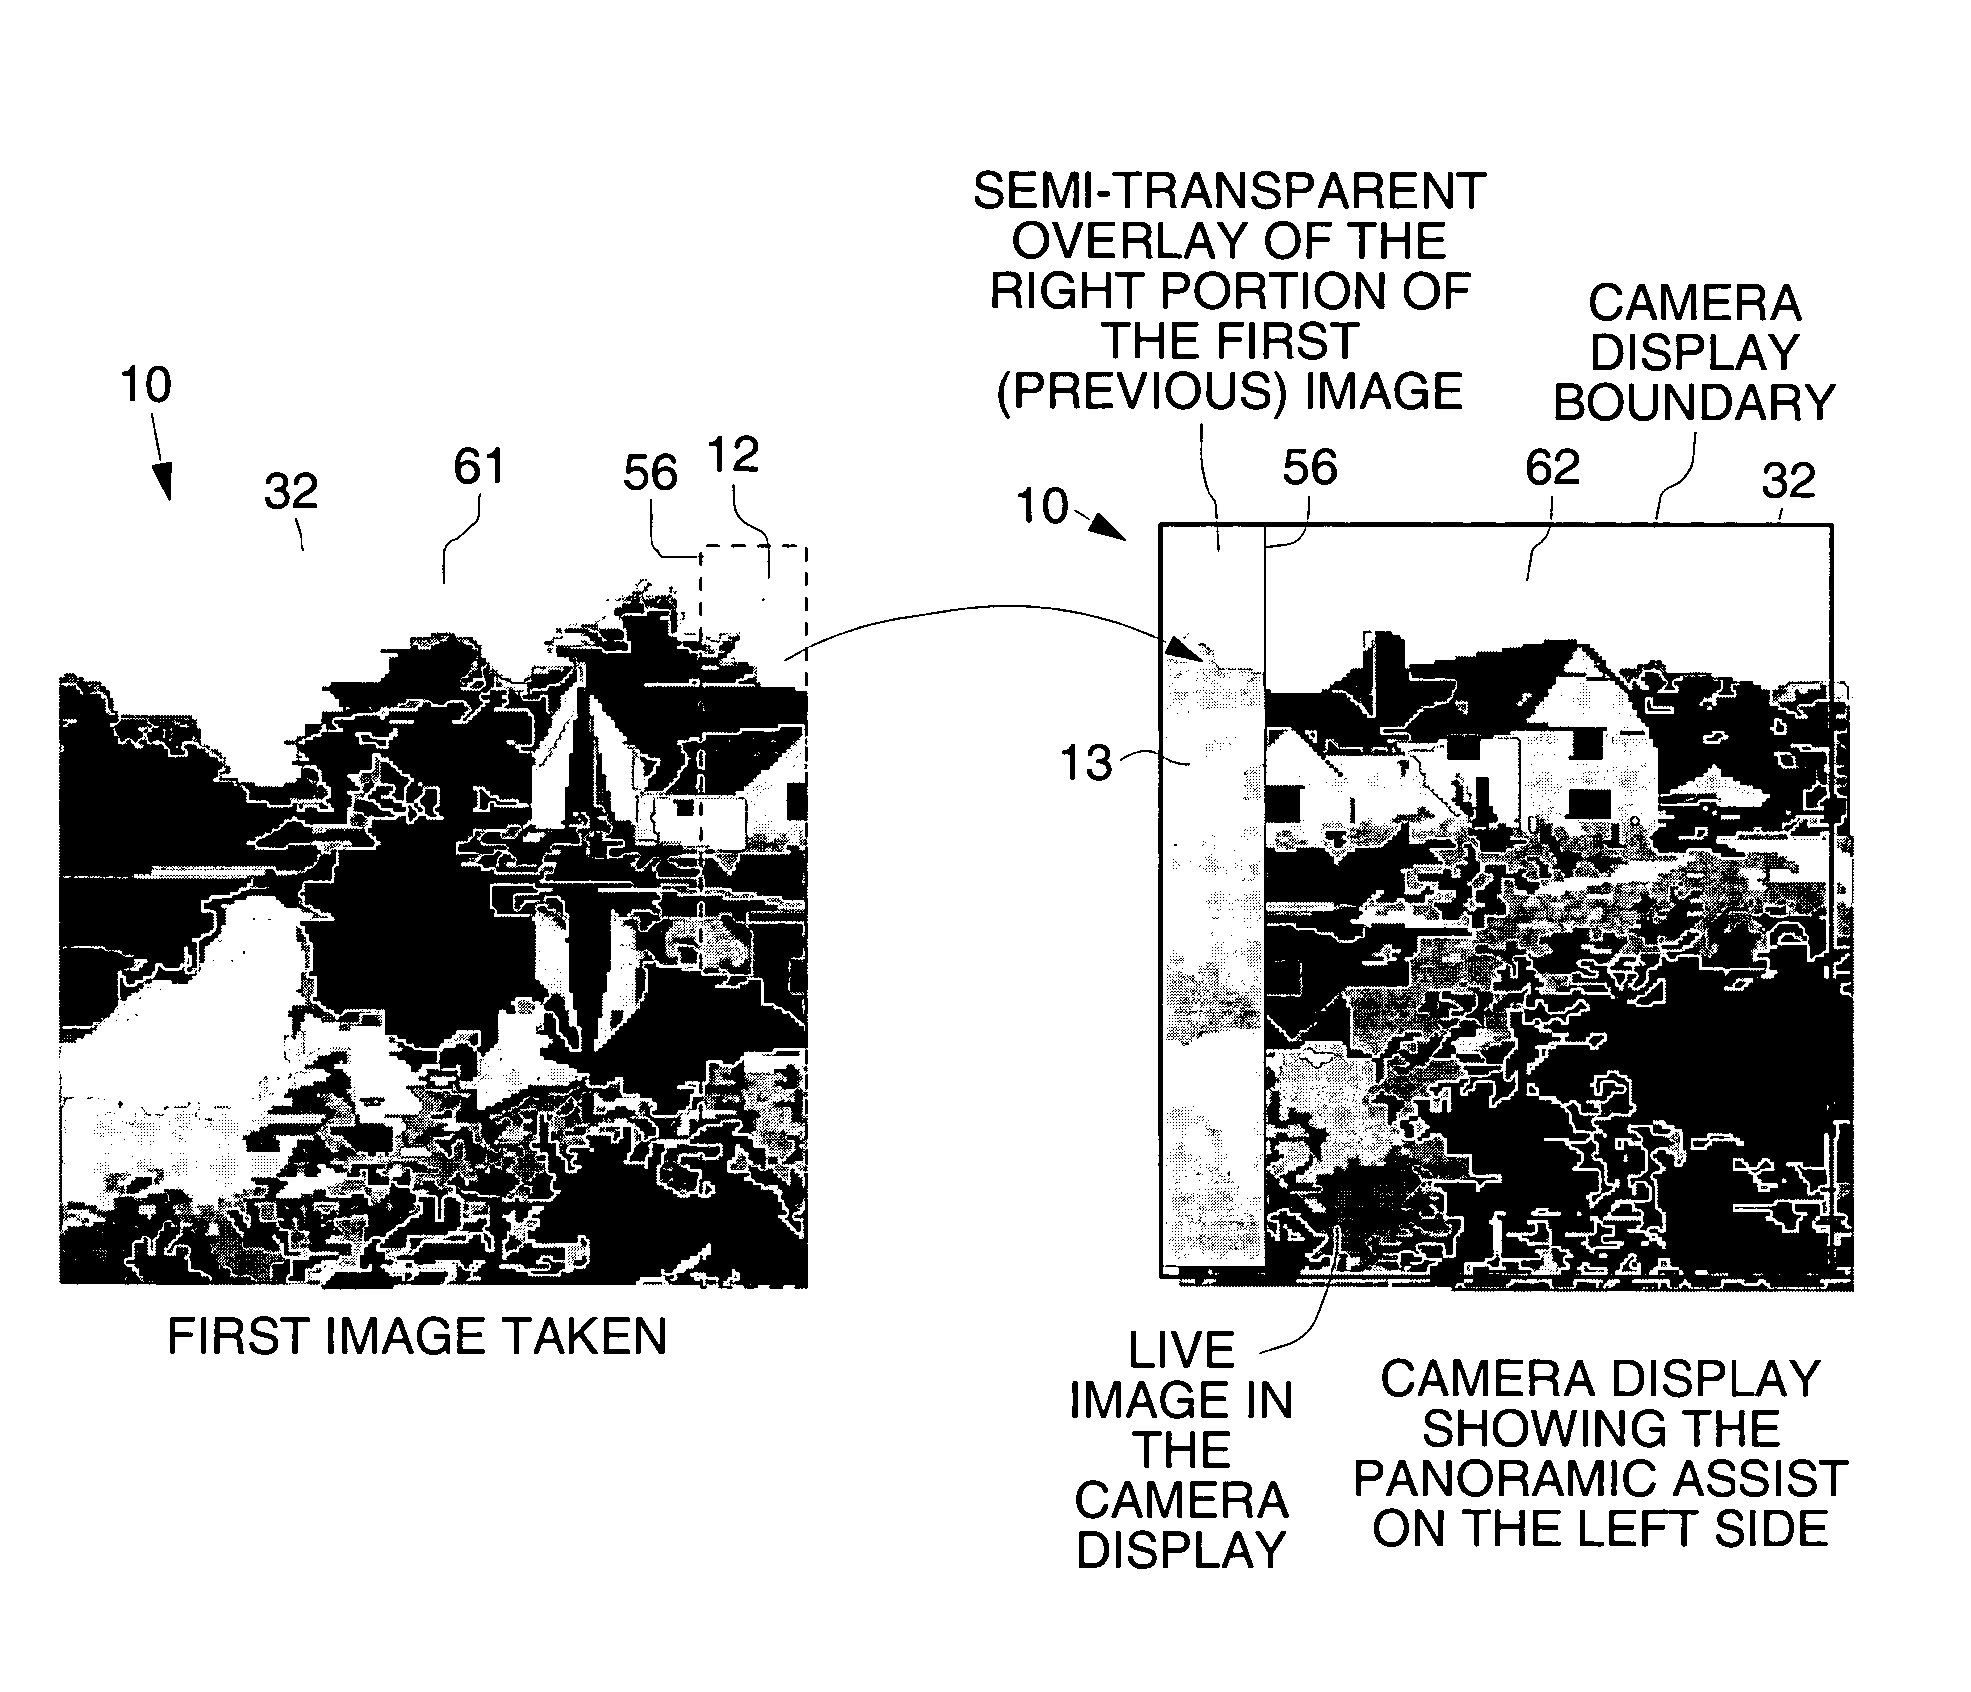 Digital camera and method for in creating still panoramas and composite photographs